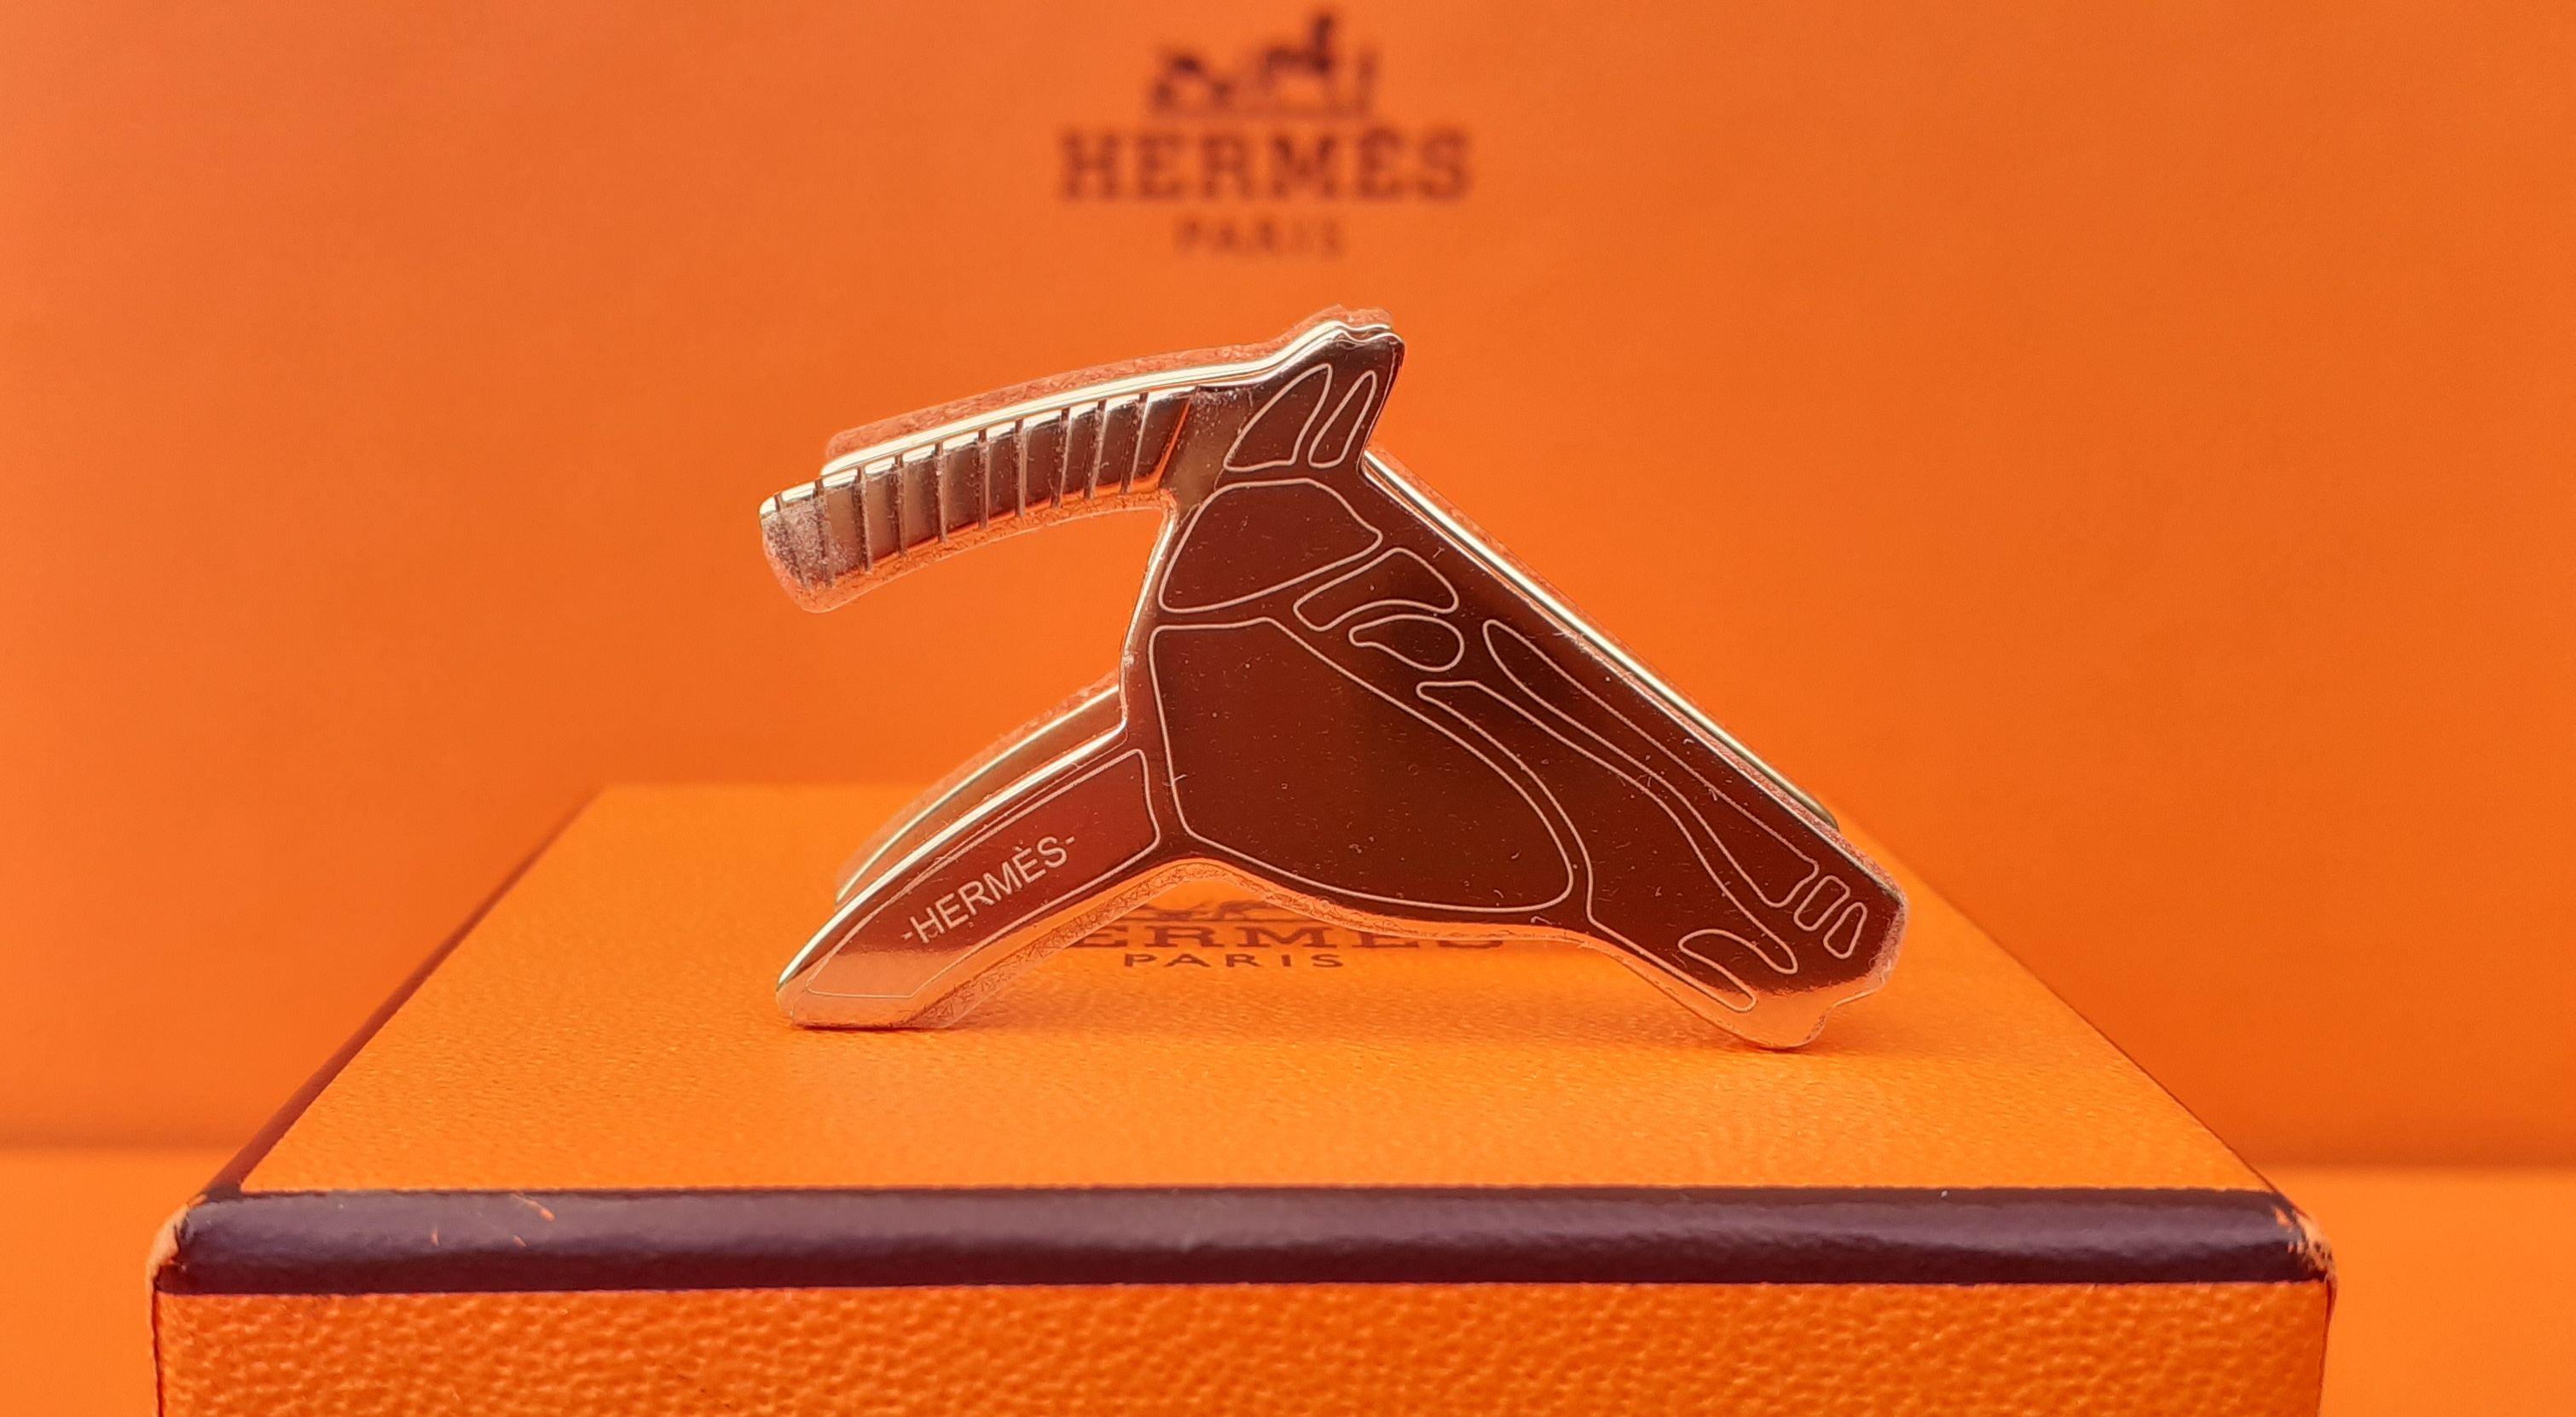 Beautiful Authentic Hermès Scarf Ring

Shaped in a Horse's Head / Drawing on one side

Made in France

Made of Permabrass

Colorways: Pale Yellow Gold, between Yellow gold and Rosé Gold

Measurements: 
- Around 3,6 cm Length (1,42')
- Around 2 cm